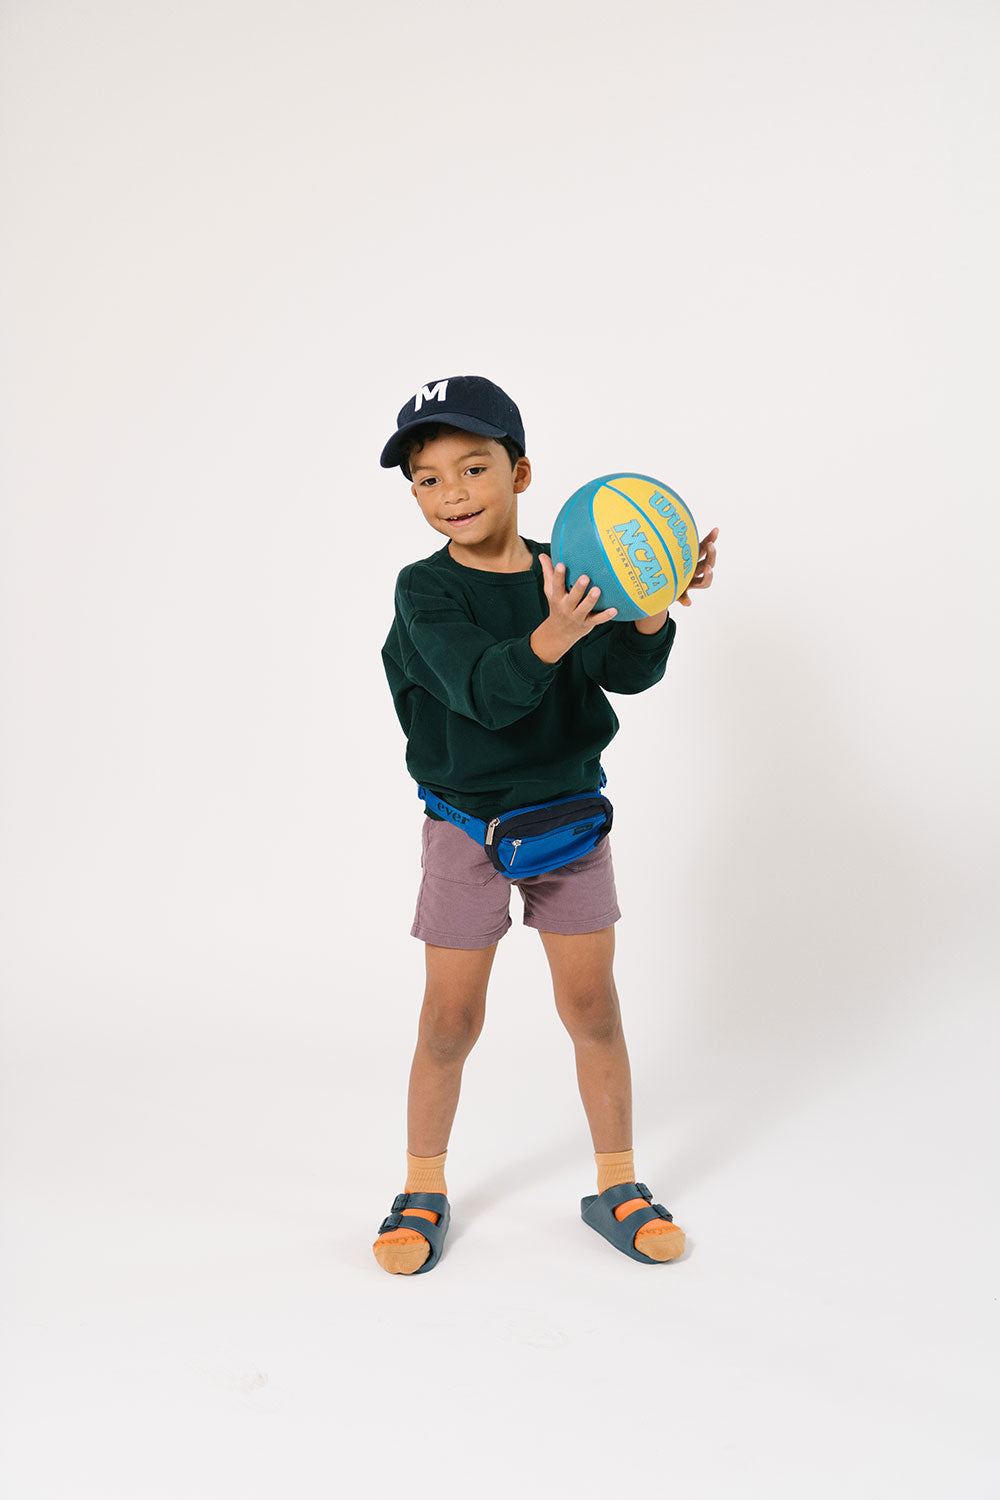 Young boy playing with a basketball in Everyway activewear. Featuring fanny pack in blue